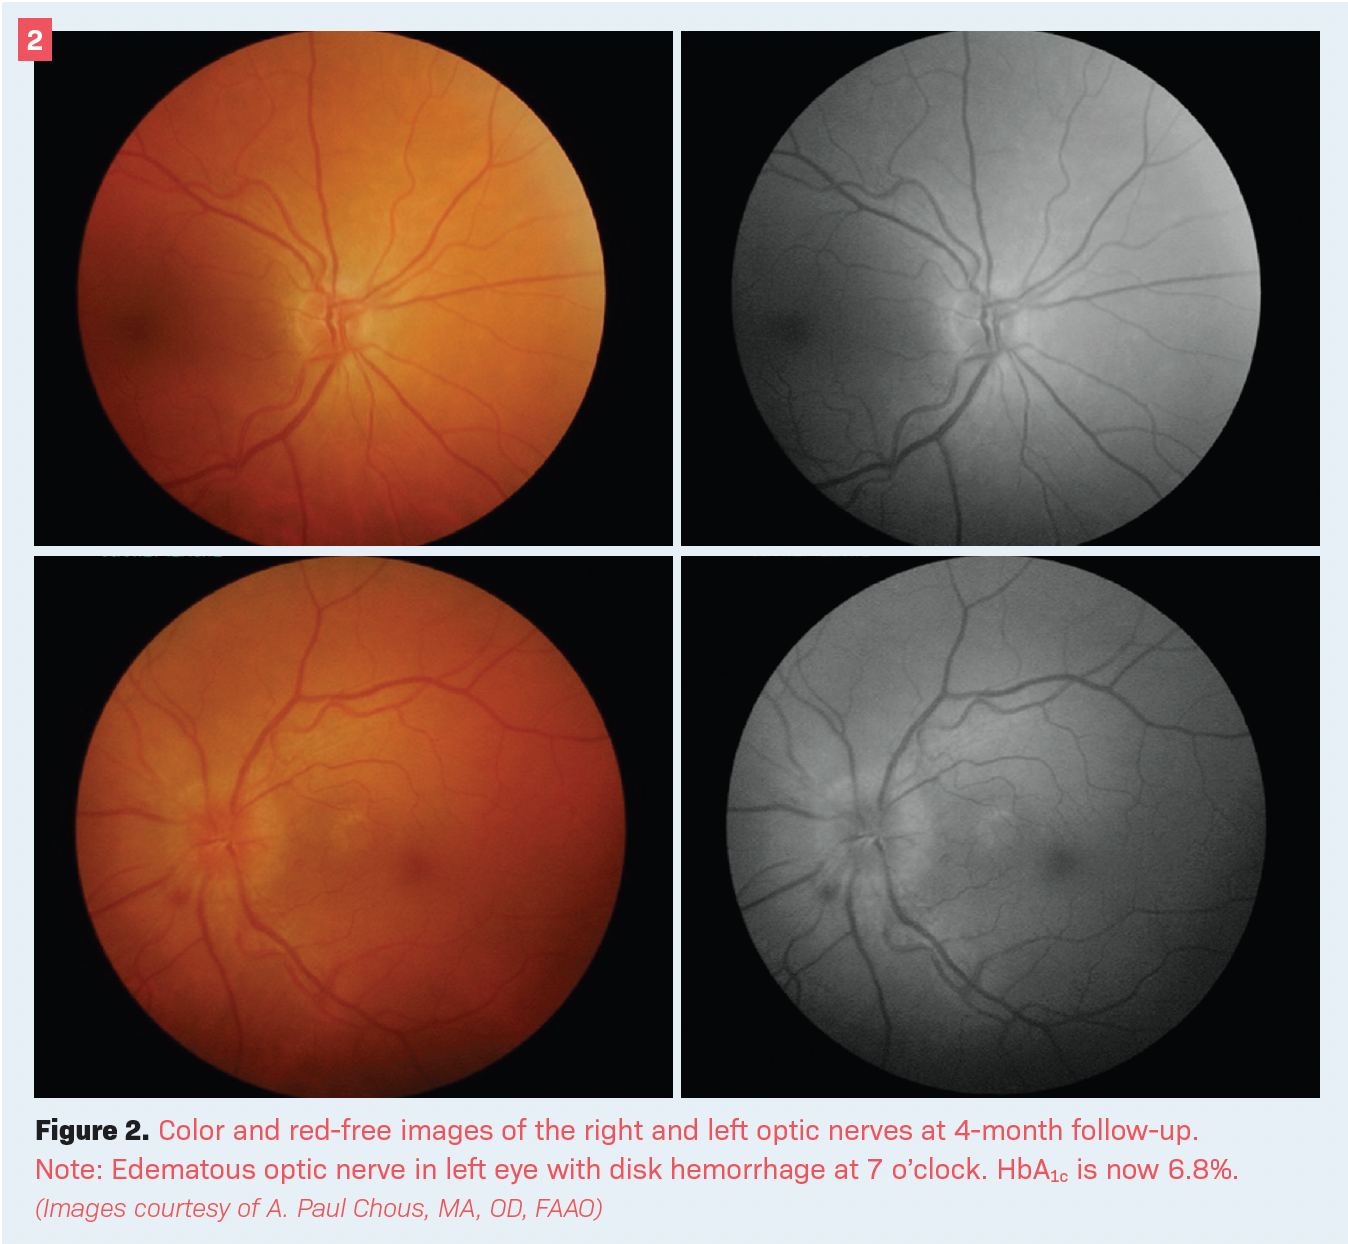 Optic disk swelling in an asymptomatic patient with diabetes